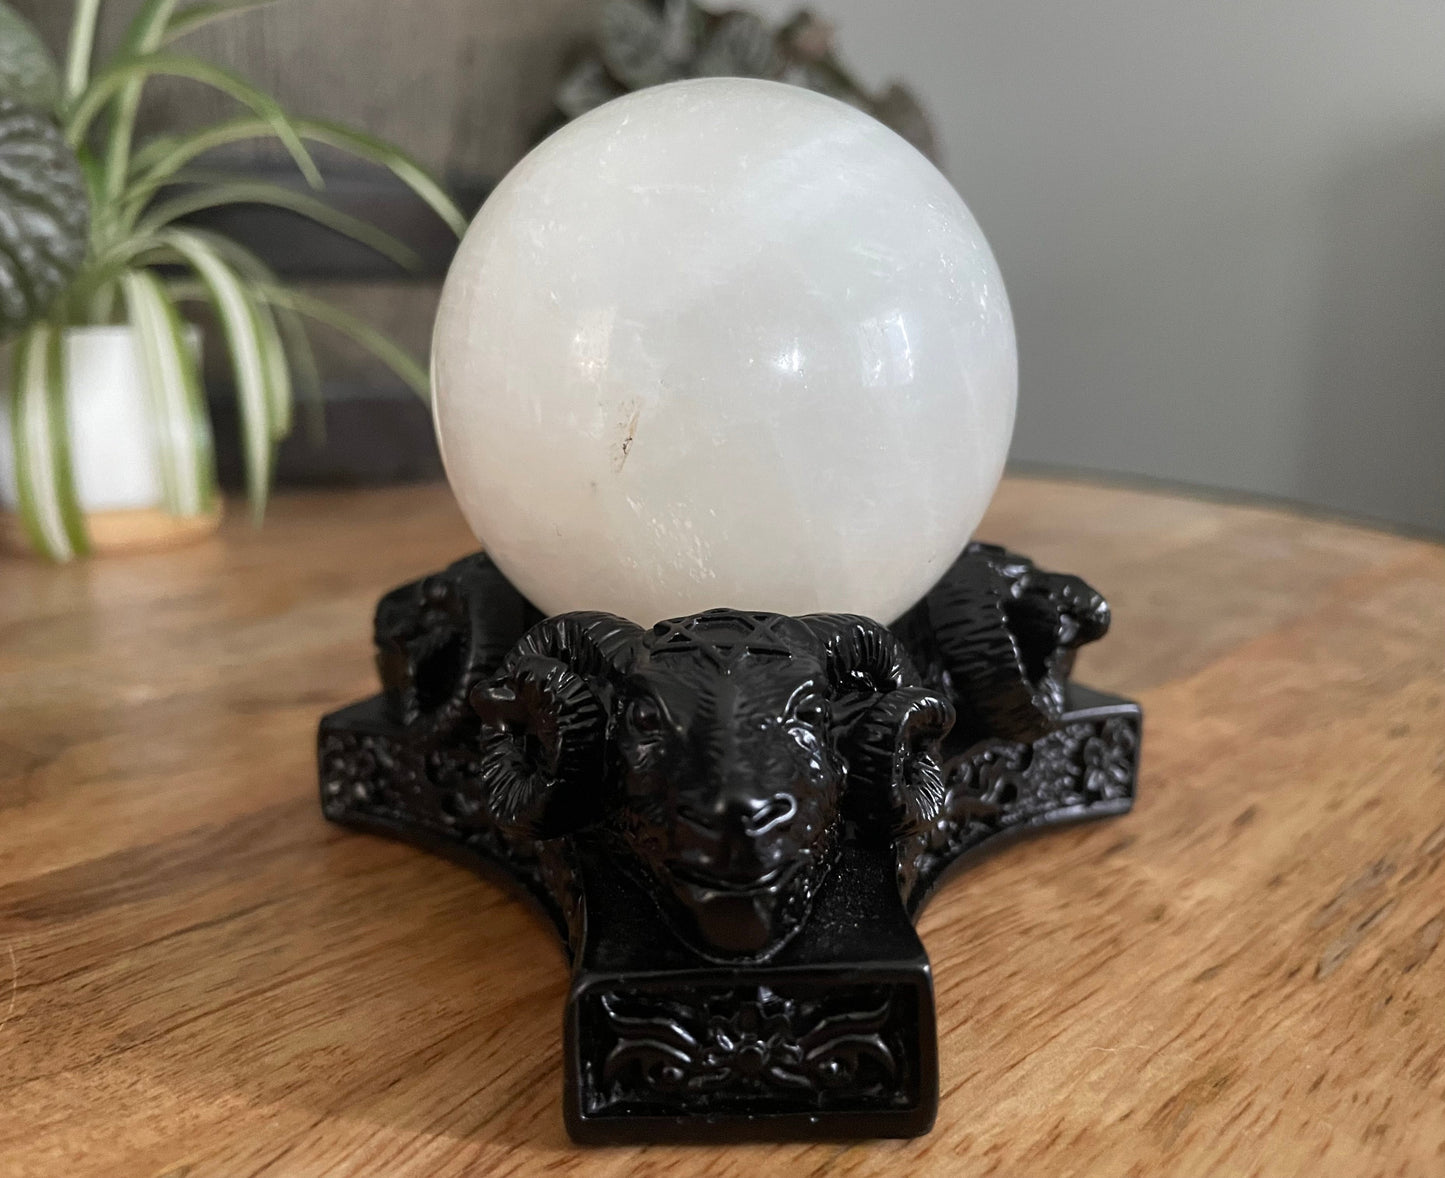 Pictured is a sphere stand in the shape of three ram skulls or goat skulls.